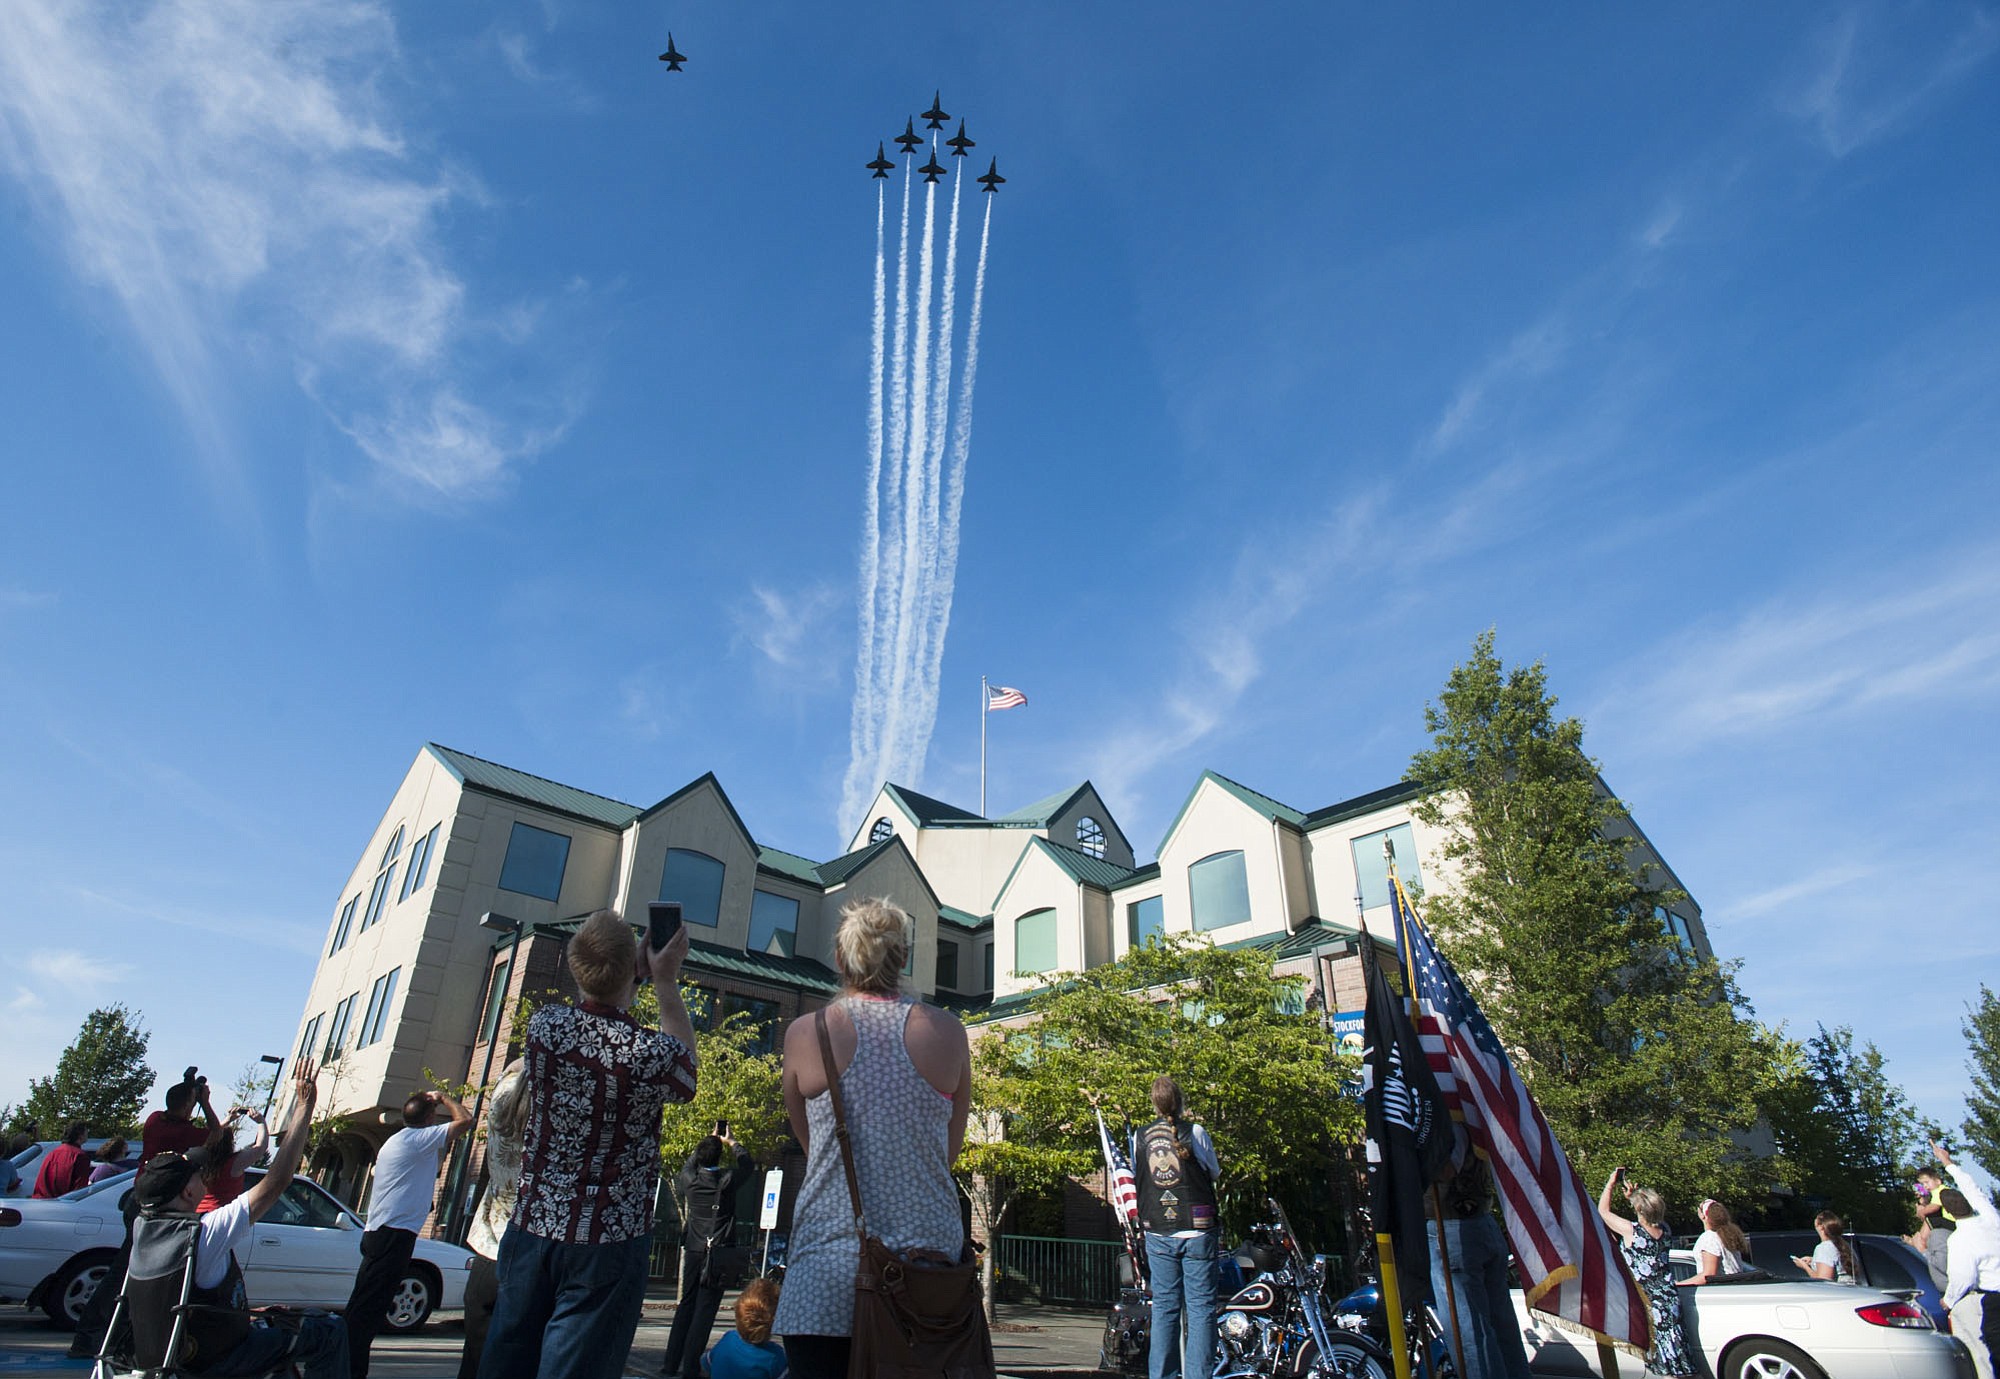 Six F-18 Hornet jet fighters fly Wednesday over the Harley H. Hall Building in Hazel Dell. The Blue Angel flyover was a salute to Harley Hall, a Vancouver aviator who was the Blue Angels' &quot;boss&quot; in 1970-1971.